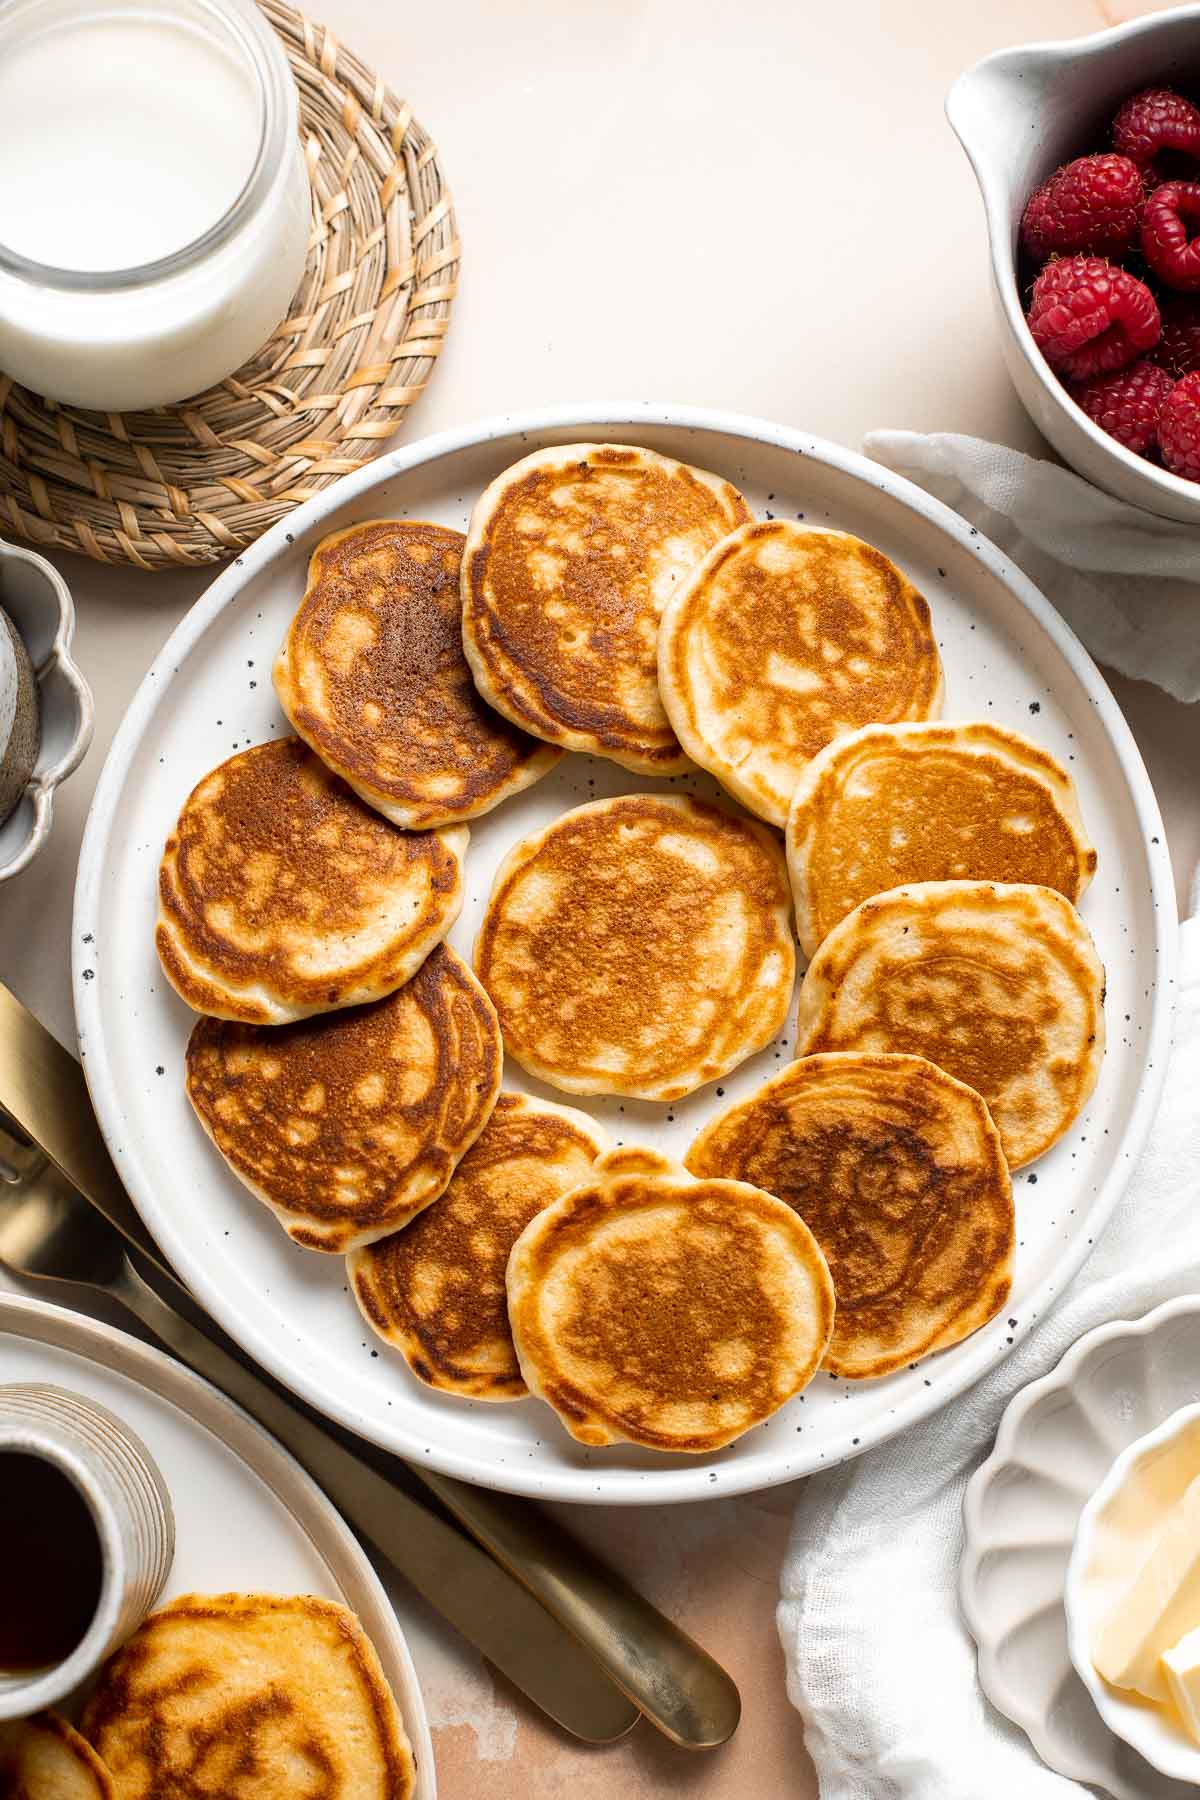 Mini Pancakes (Silver Dollar Pancakes) are the fluffy, fun-sized version of classic pancakes. They're easy to make using a handful of everyday ingredients. | aheadofthyme.com